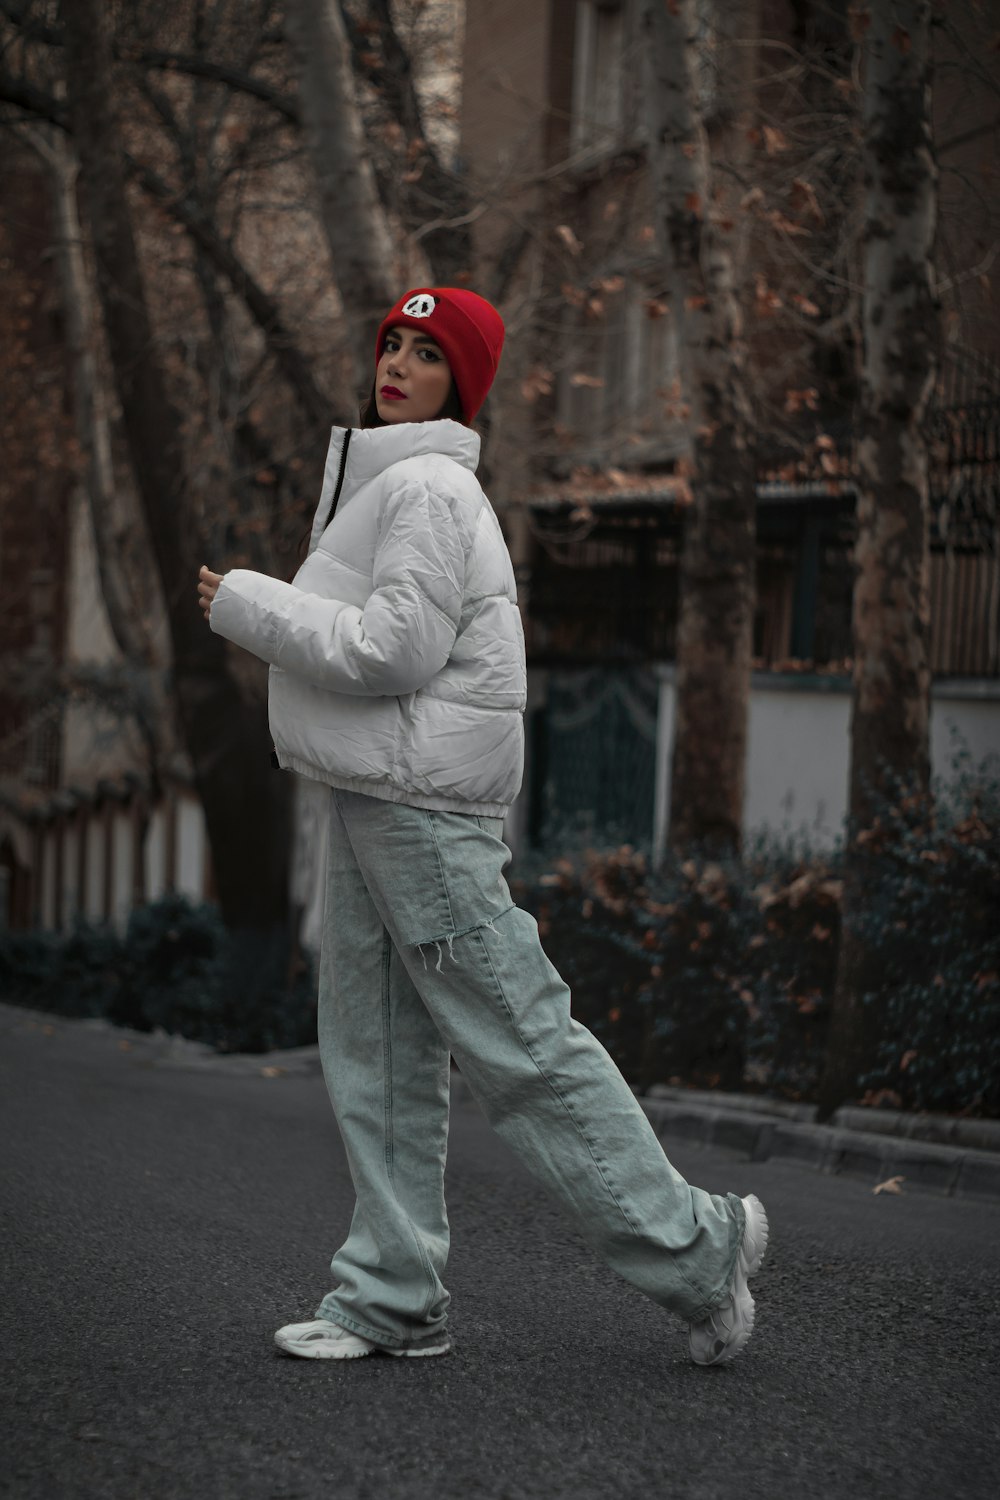 a person walking down a street with a red hat on